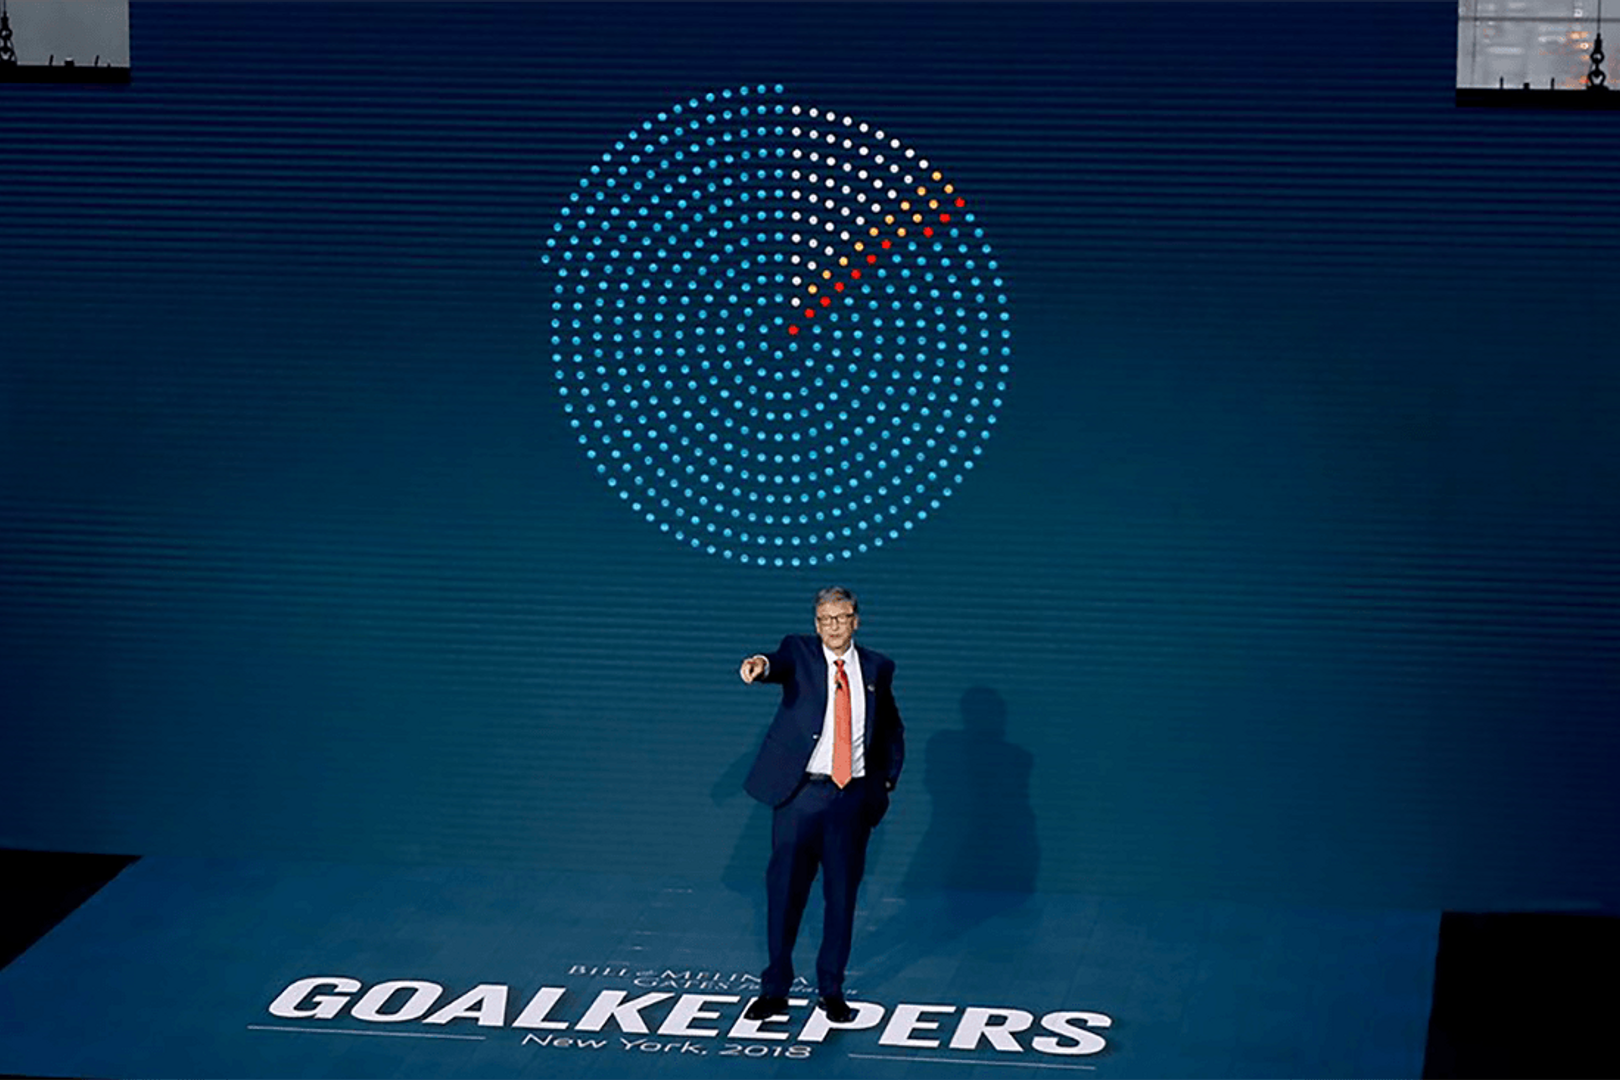 A photograph taken of Bill Gates on stage speaking at a Goalkeepers. Behind him is a pie chart made of dots. Beneath his feet is the word 'Goalkeepers' in larger white letters.